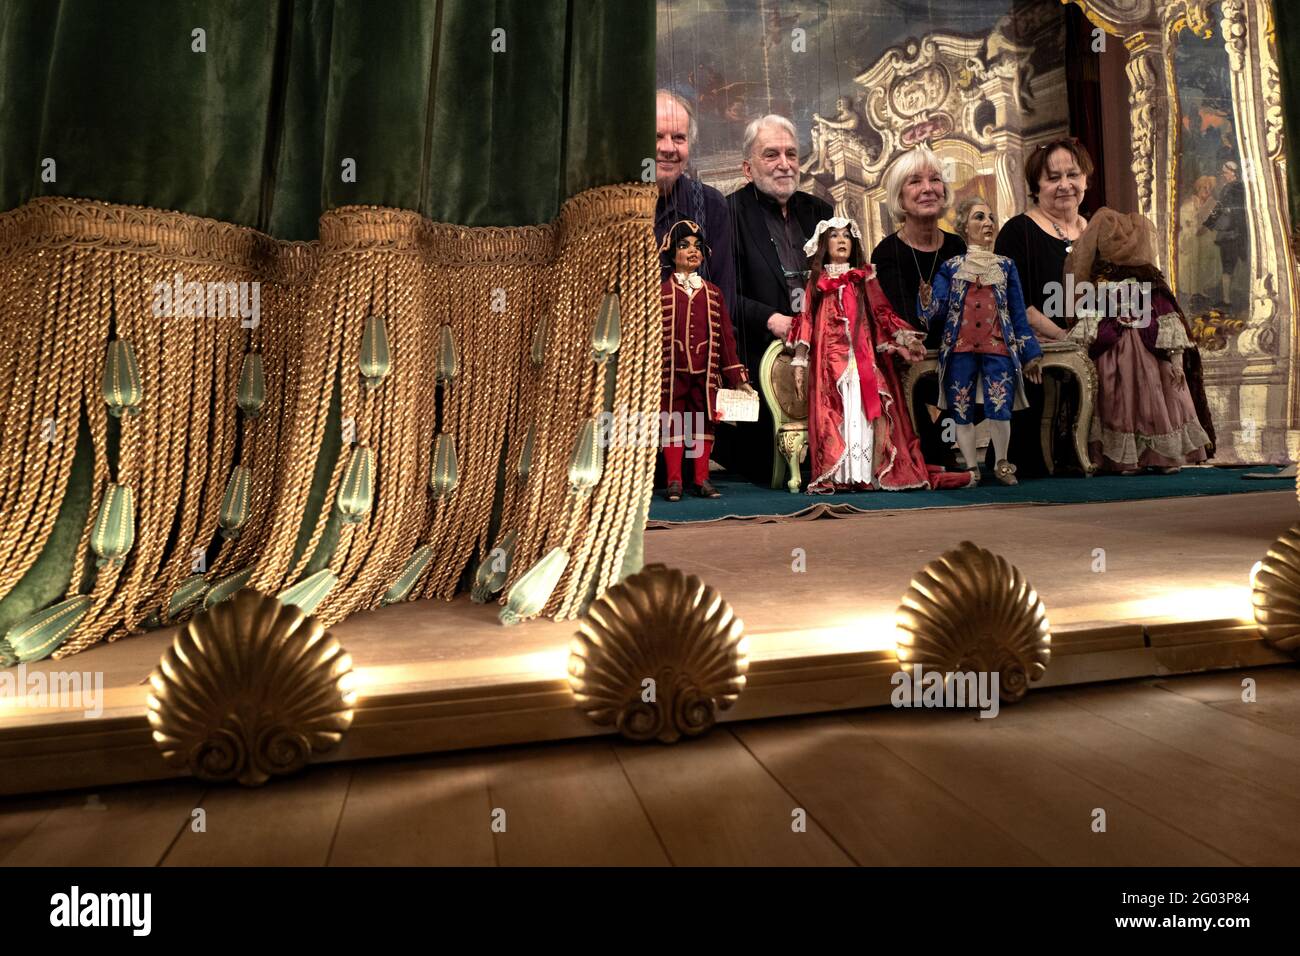 Puppeteers and actors of the Carlo Colla Company, behind the curtain at the end of the show at the Gerolamo historical theater, in Milan. Stock Photo